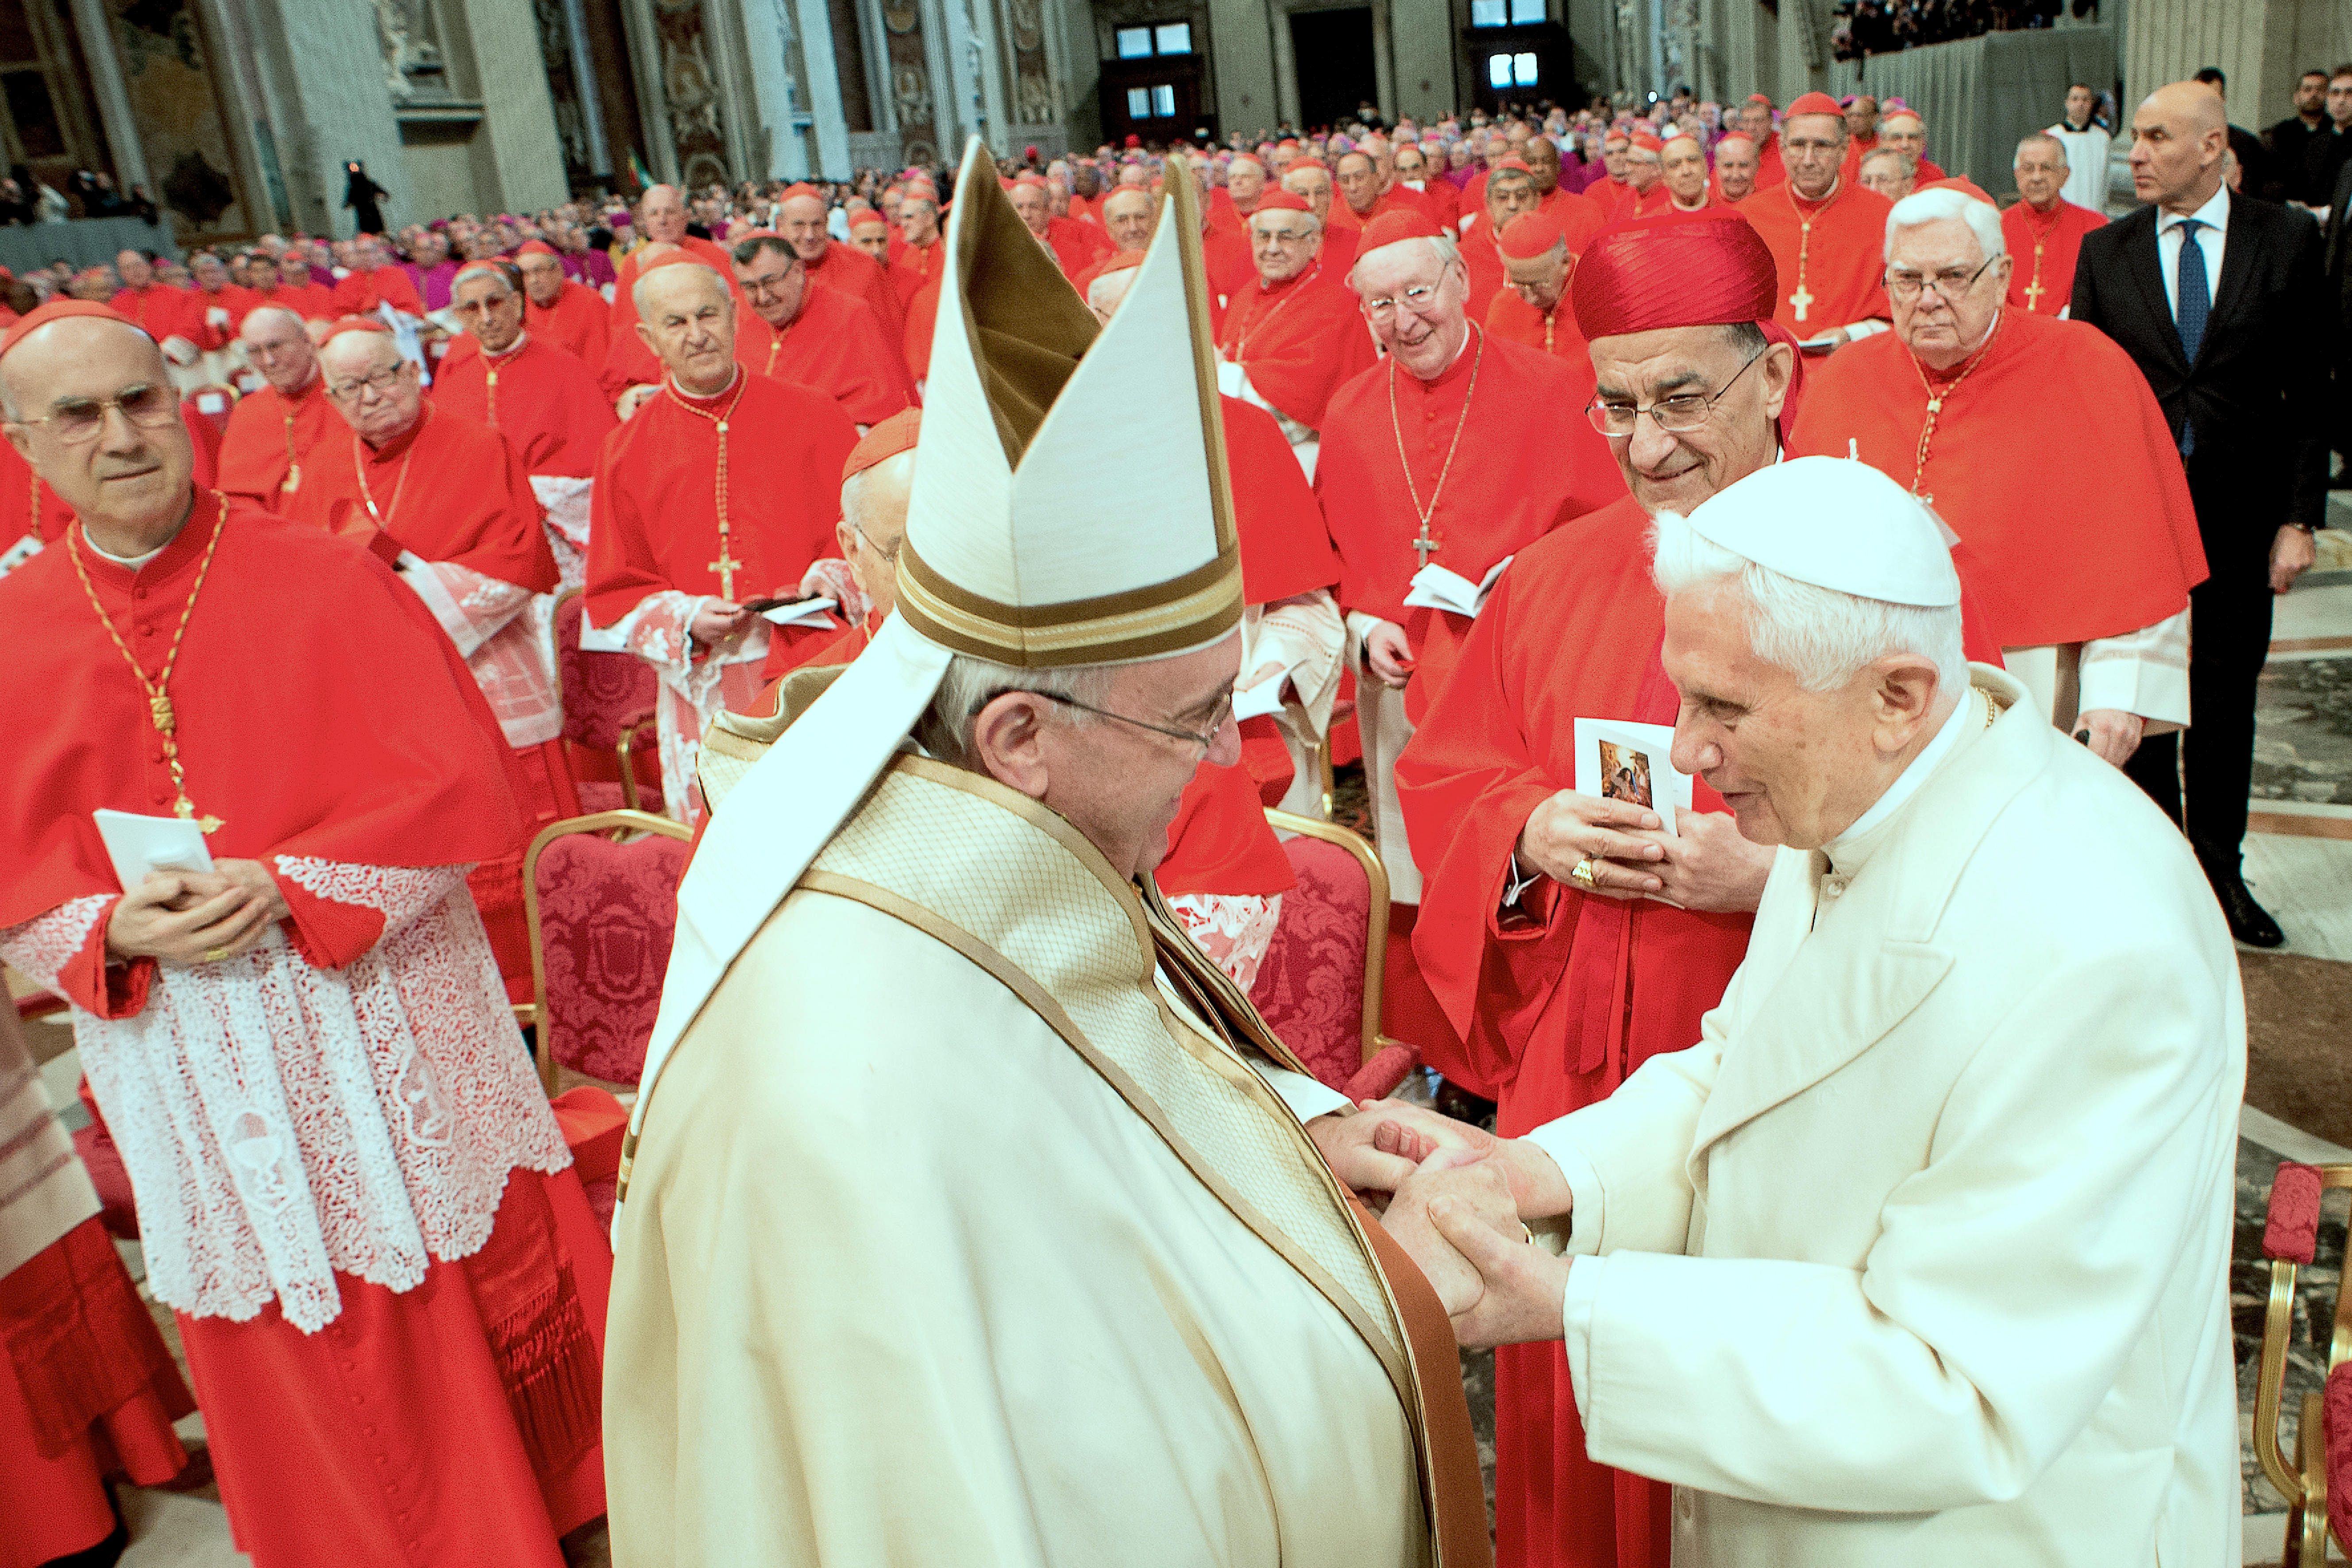 Pope Francis meets Benedict XVI during the Ordinary Public Consistory for the creation of new Cardinals